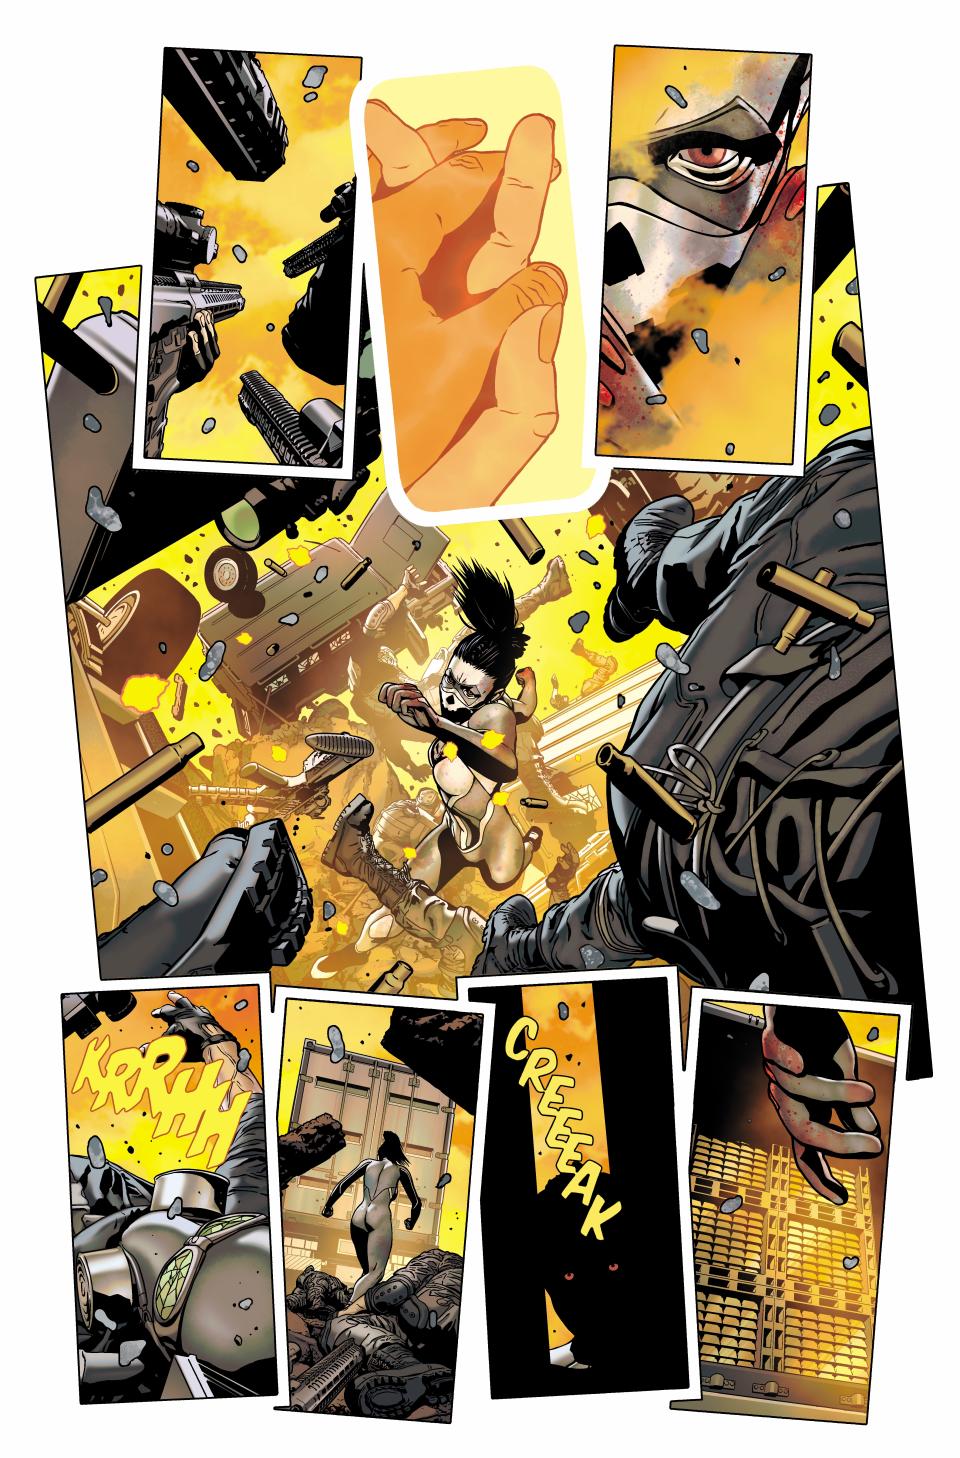 Pages from The Madness #1